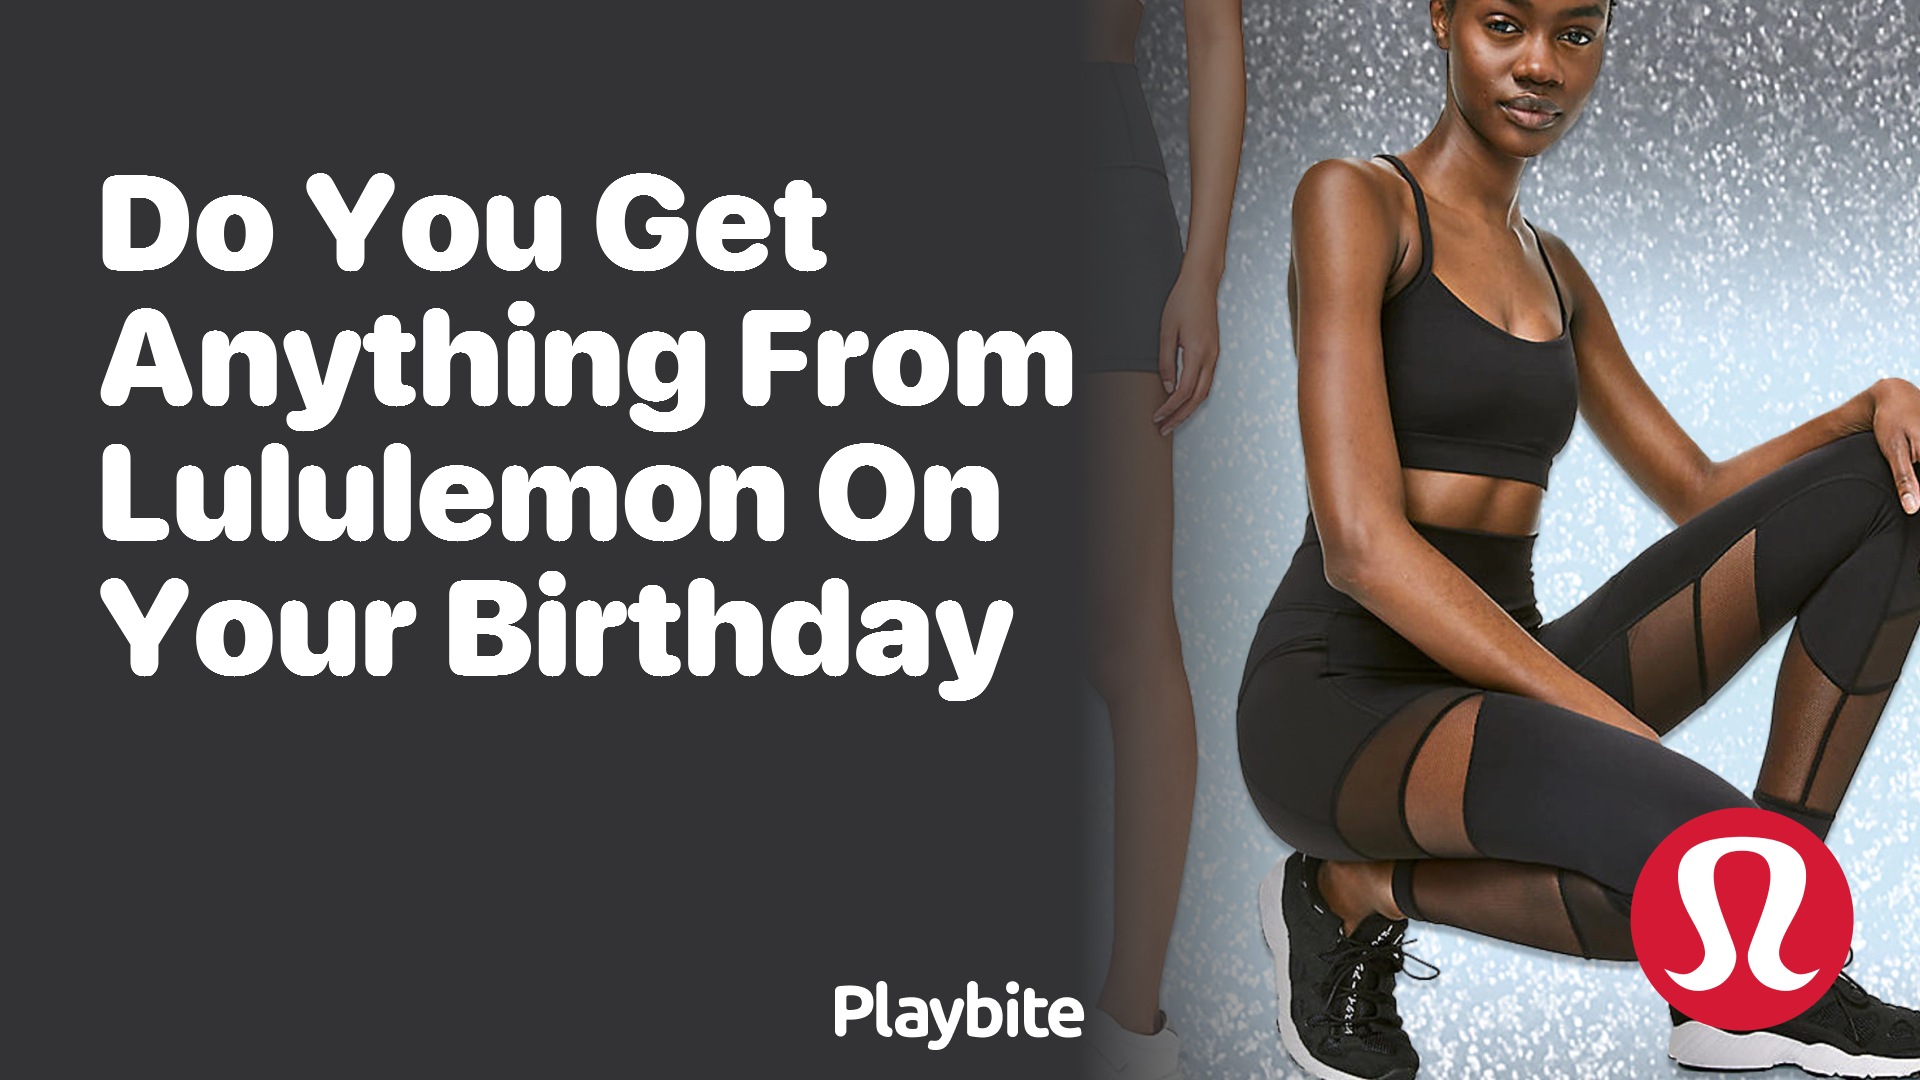 Do You Get Anything from Lululemon on Your Birthday? - Playbite